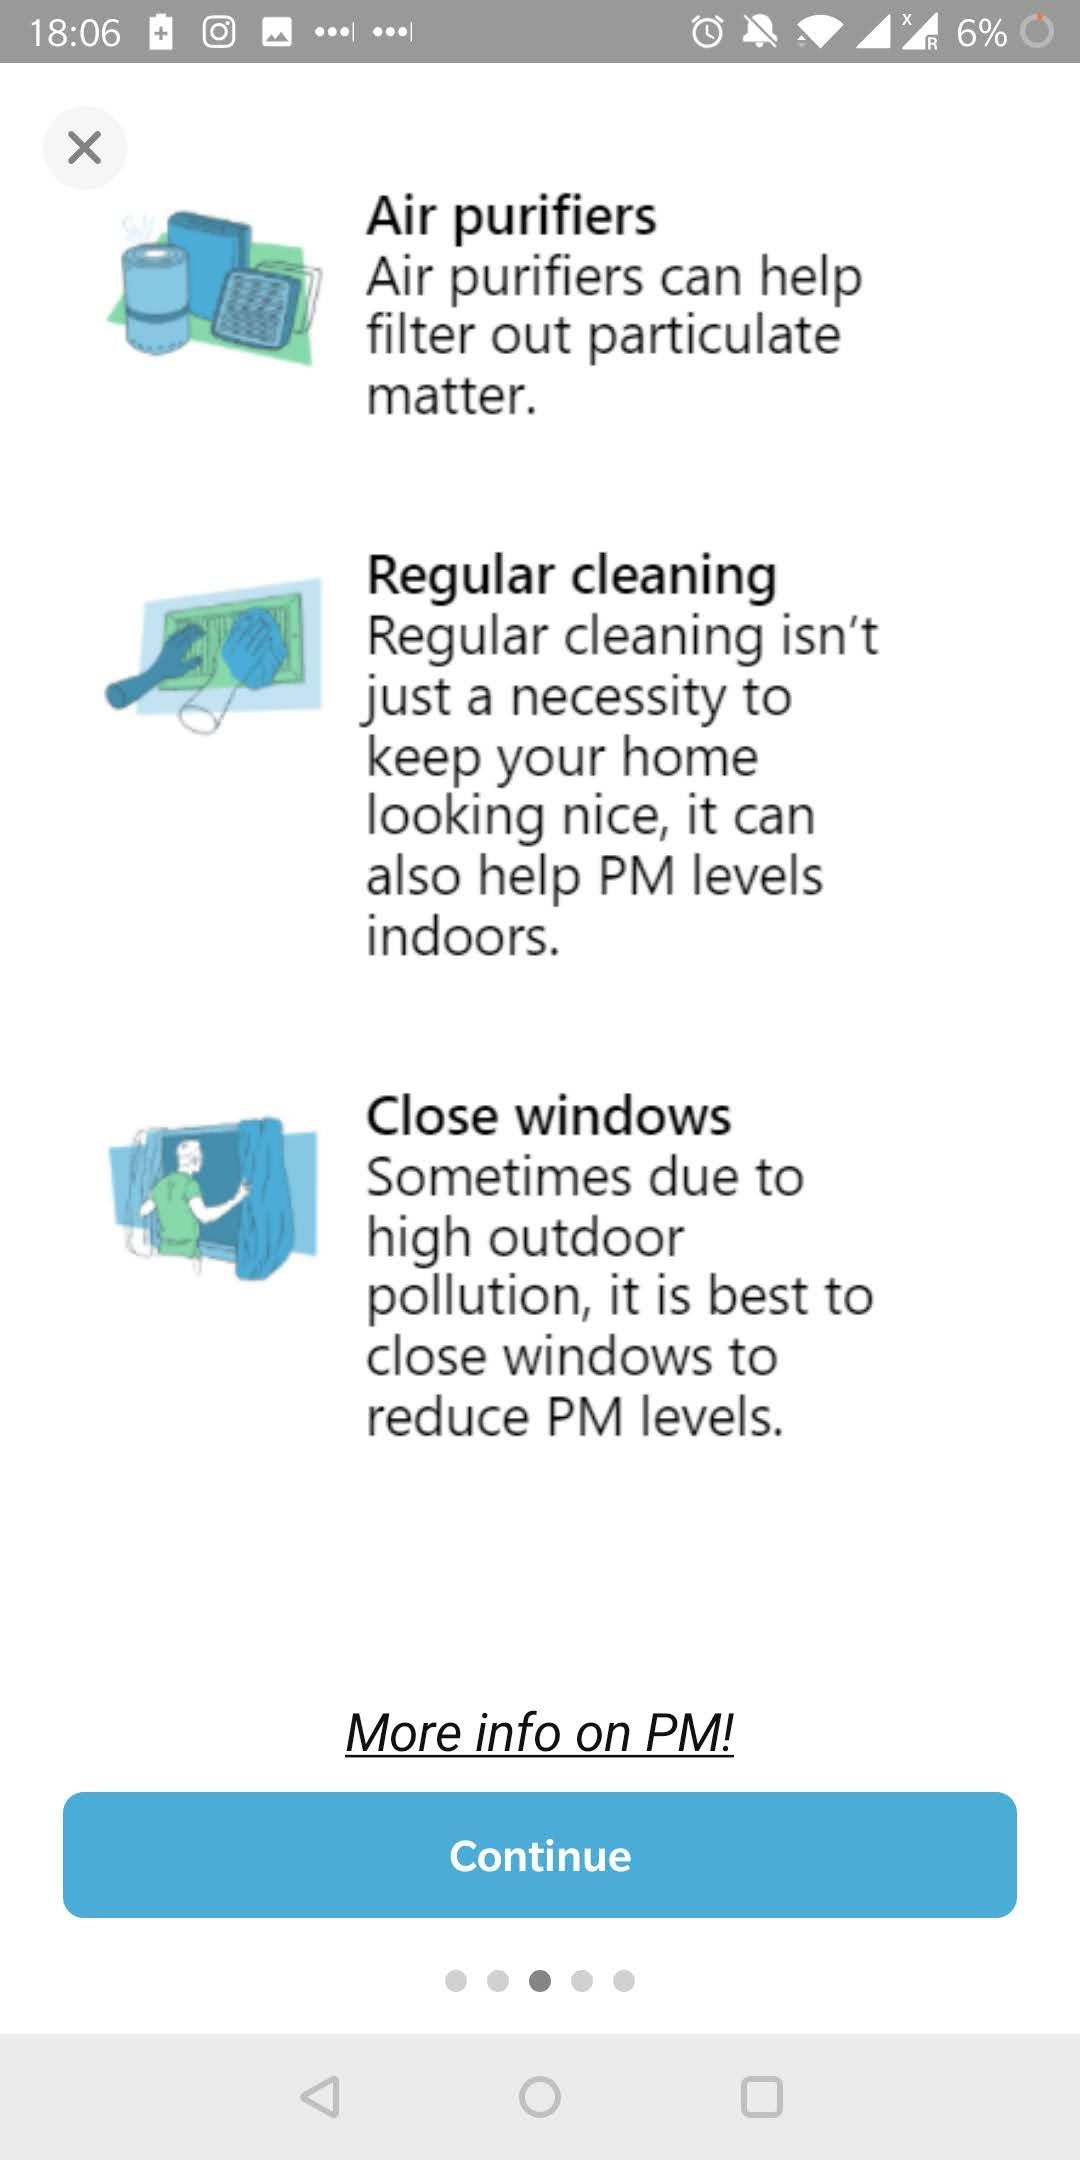 Airthings View Pollution App PM When to Take Action Part 2